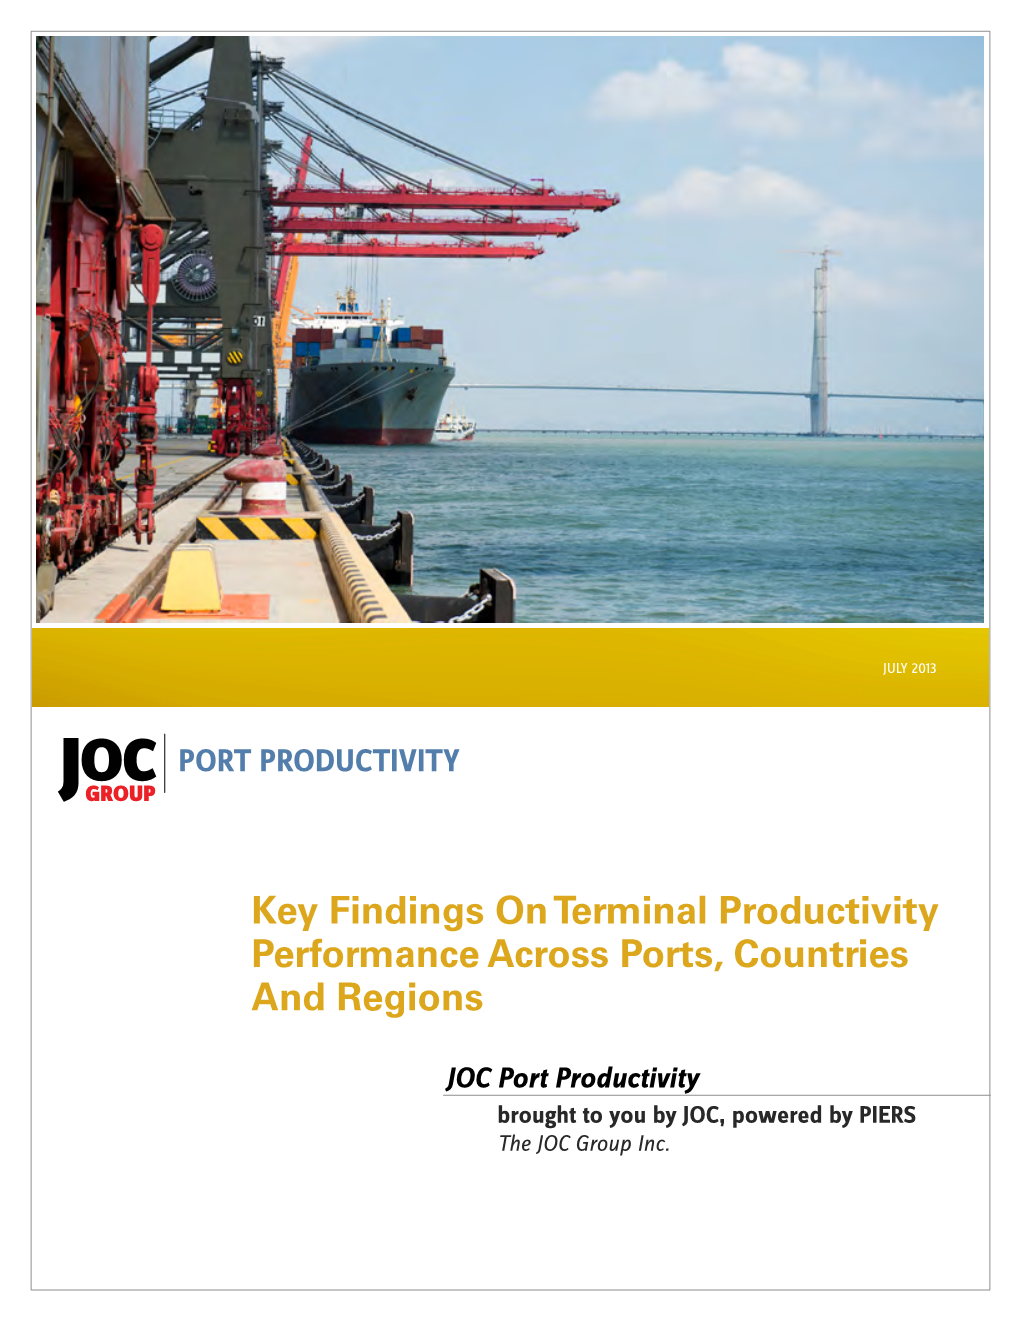 Key Findings on Terminal Productivity Performance Across Ports, Countries and Regions